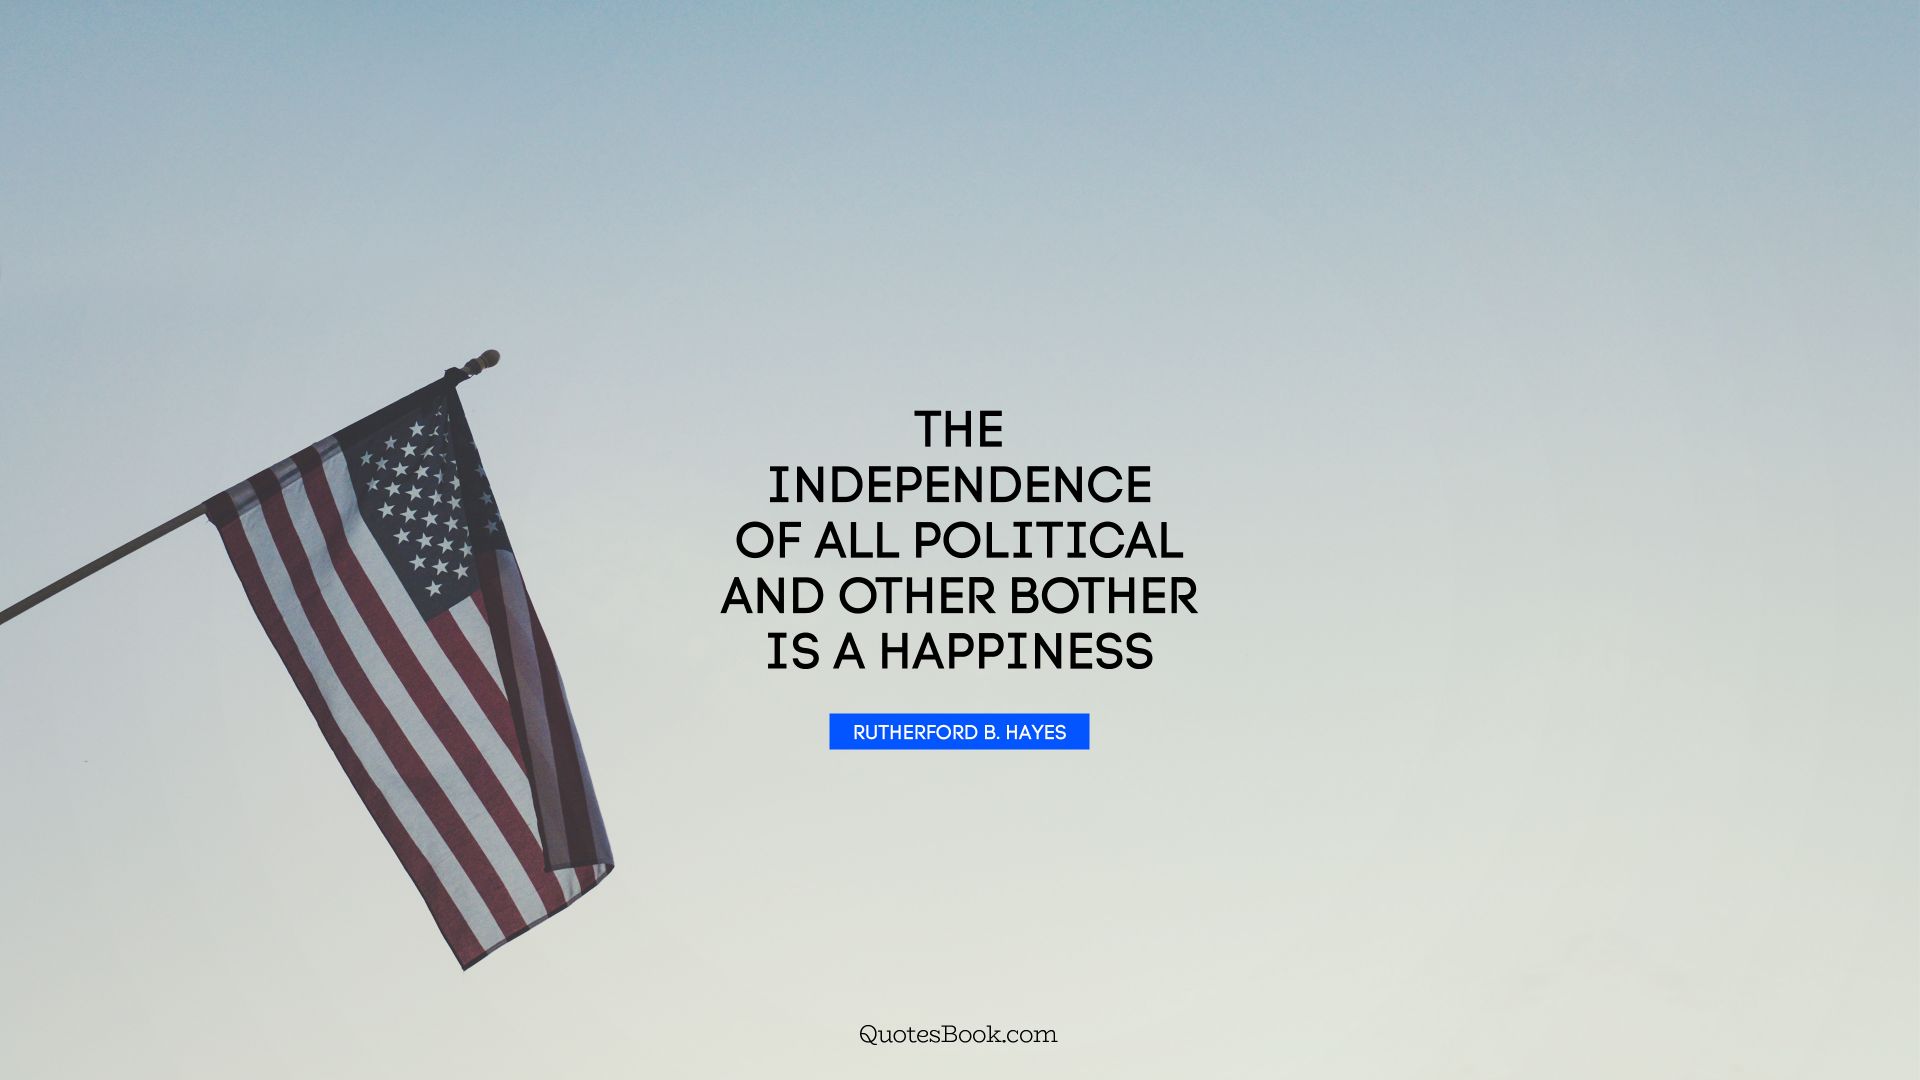 The independence of all political and other bother is a happiness. - Quote by Rutherford B. Hayes